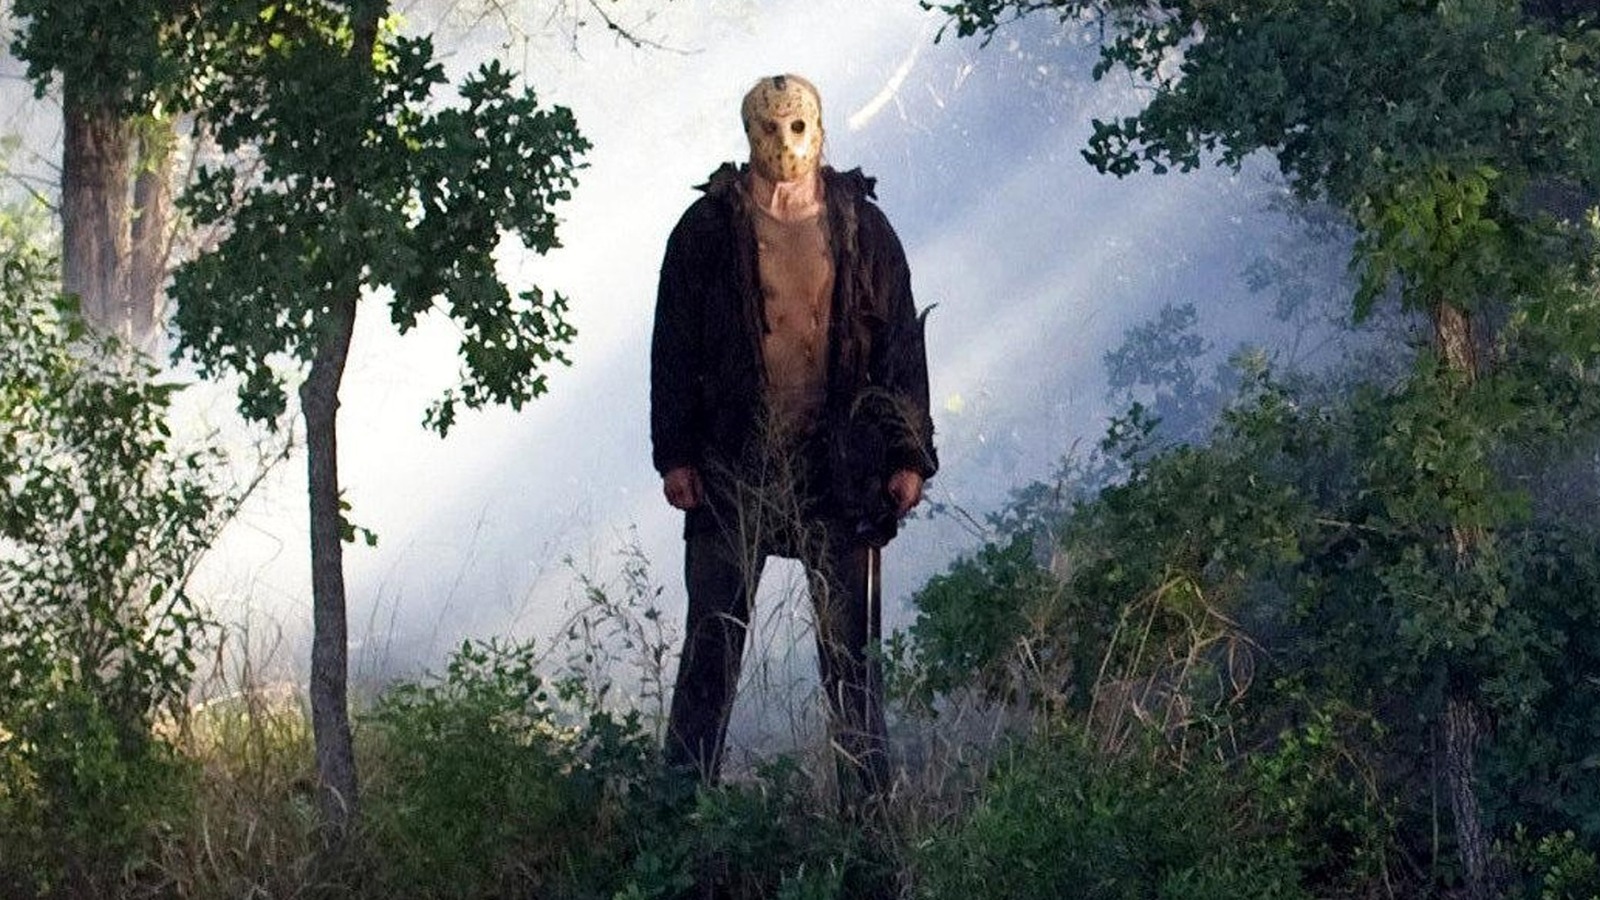 Friday The 13th Conquered The Box Office 15 Years Ago – Then Jason Voorhees Vanished